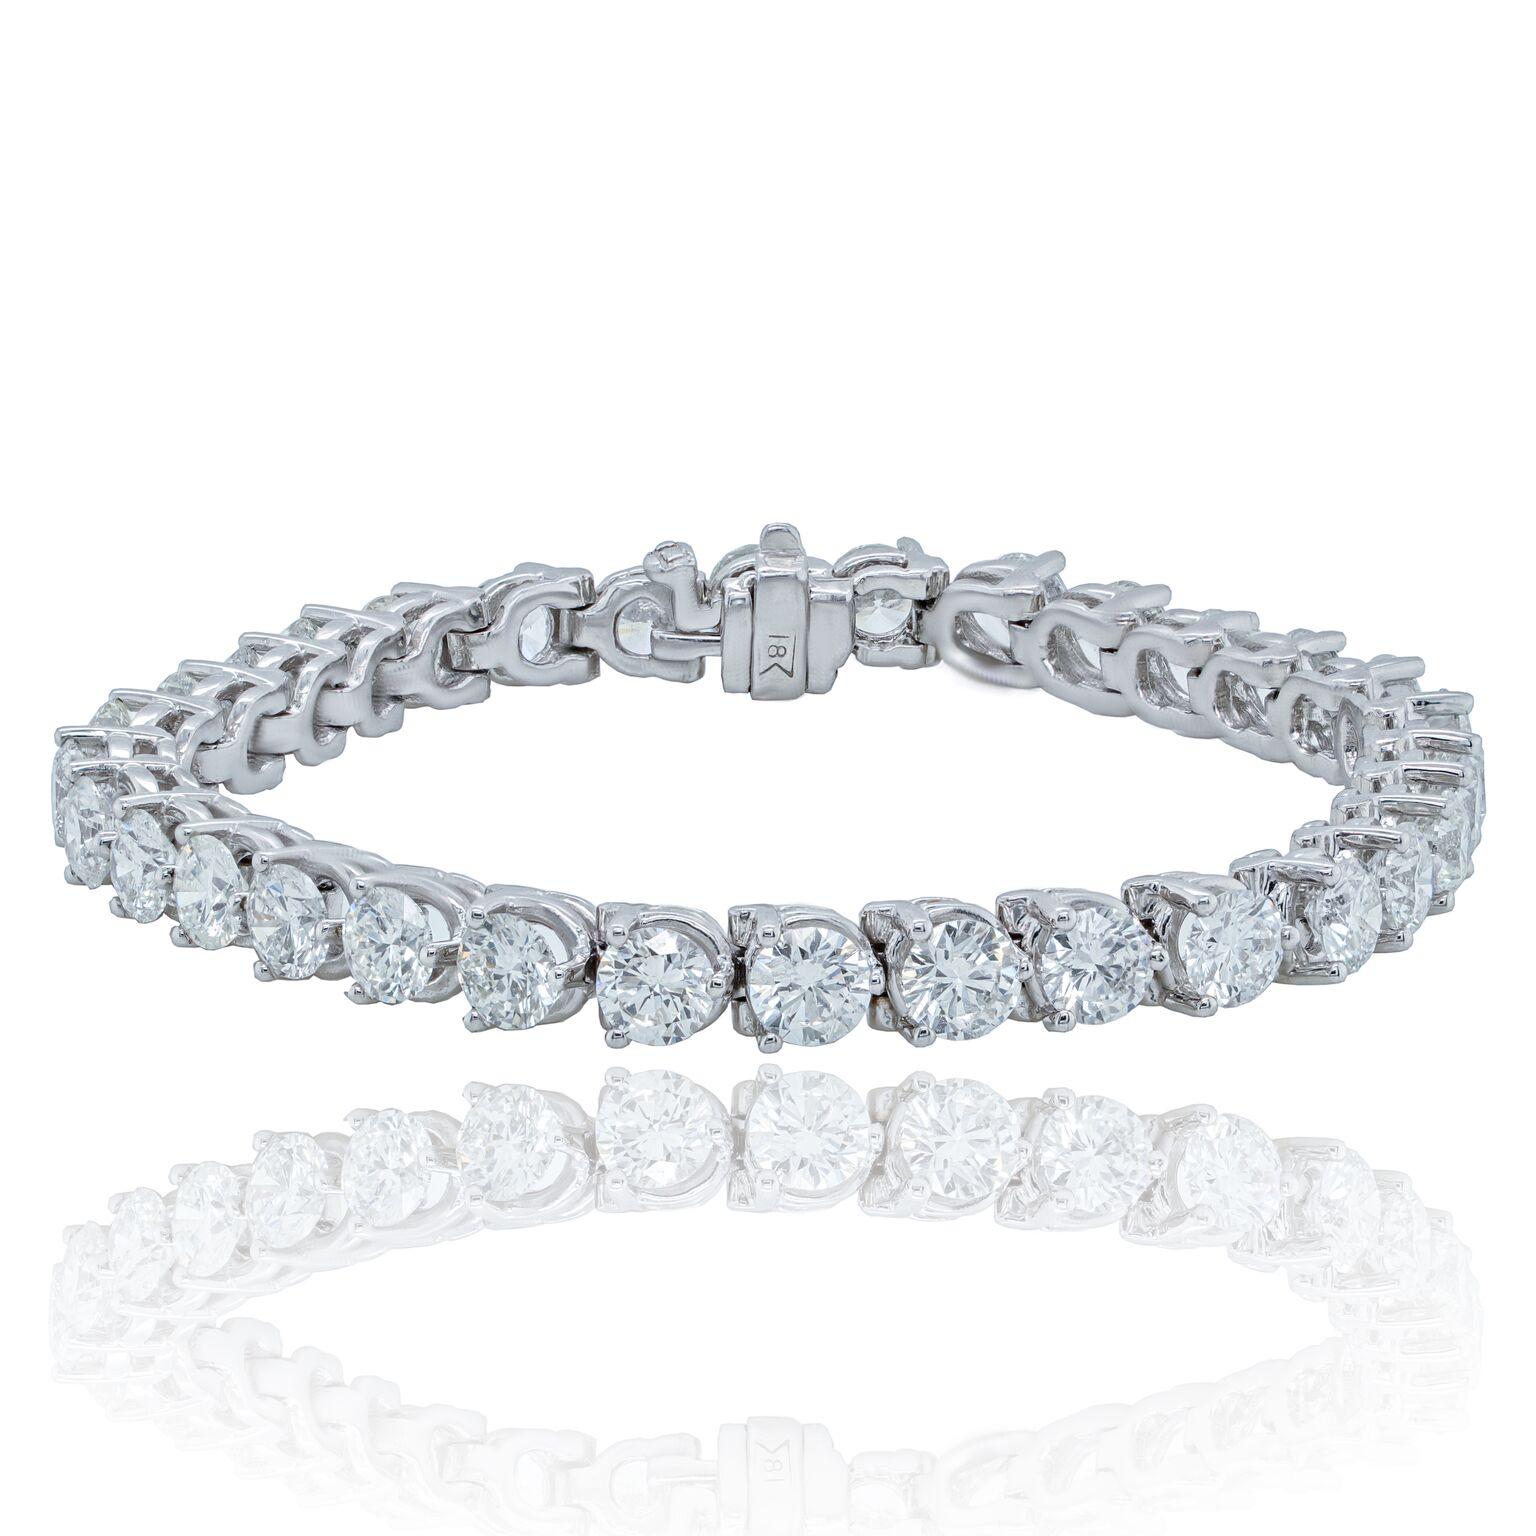 18kt white gold tennis bracelet with 7.85 cts tw of round diamonds in a 3 prong setting FG SI
Diana M. is a leading supplier of top-quality fine jewelry for over 35 years.
Diana M is one-stop shop for all your jewelry shopping, carrying line of